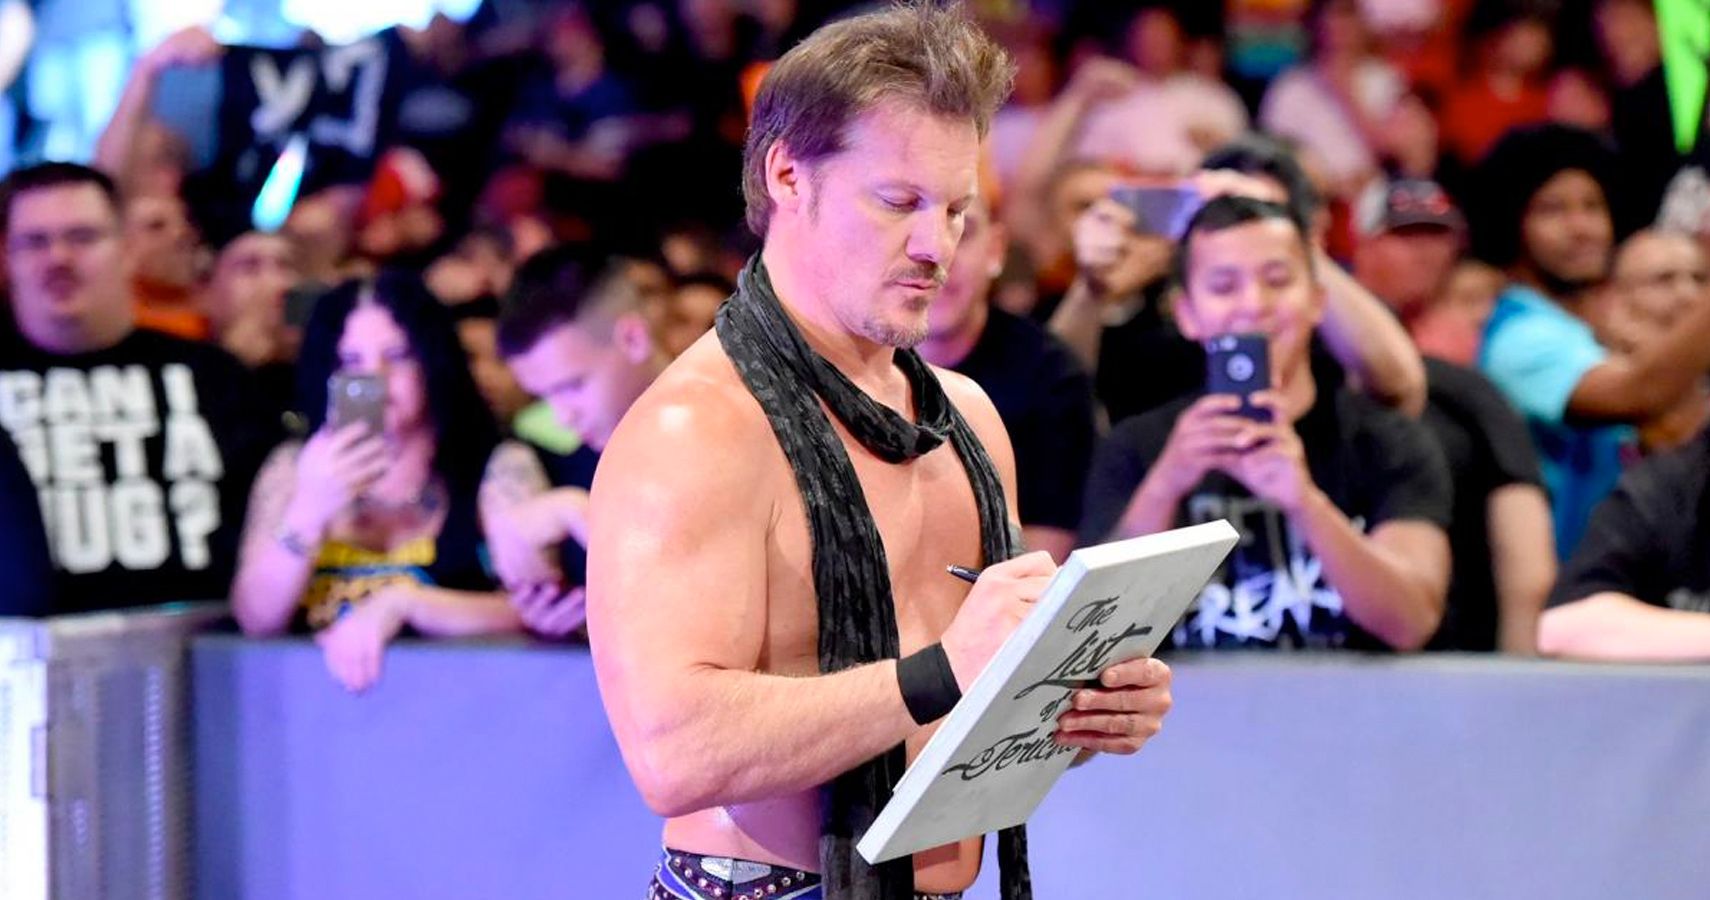 Chris Jericho Writing In The List